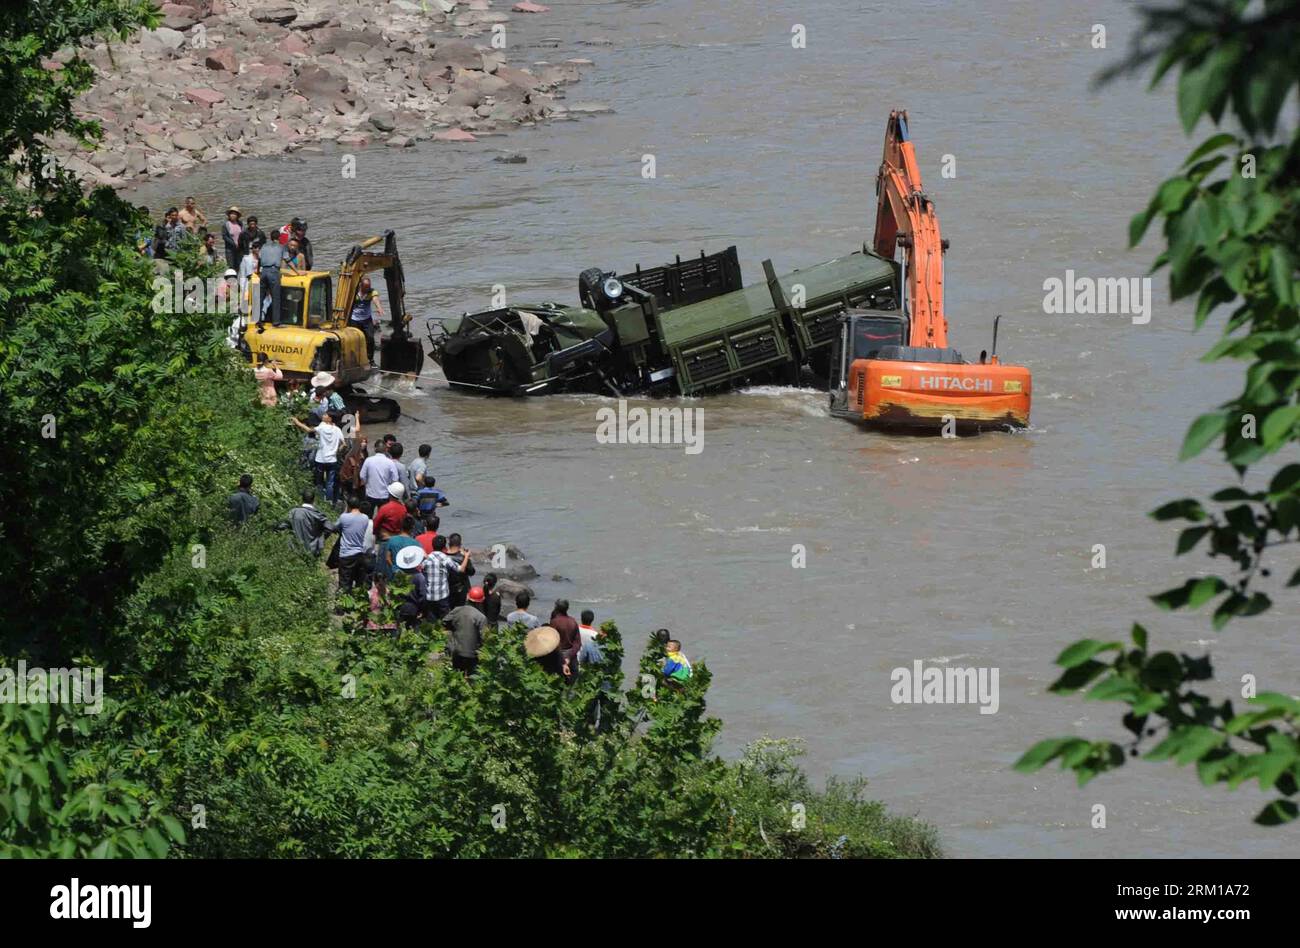 Bildnummer: 59544774  Datum: 20.04.2013  Copyright: imago/Xinhua (130420) -- YA AN, April 20, 2013 (Xinhua) -- Photo taken on April 20, 2013 shows the accident site where a rescue car from Chengdu Military Region falls off a cliff into a river in southwest China s Sichuan Province. Two of the 17 soldiers in the car have died by 11:30 p.m. Saturday Beijing Time. A total of 156 have been killed in the 7.0-magnitude earthquake in Sichuan s Lushan as of 8:50 p.m. Saturday, according to the China Earthquake Administration. (Xinhua)(wjq) CHINA-SICHUAN-EARTHQUAKE-RESCUE-ACCIDENT (CN) PUBLICATIONxNOTx Stock Photo